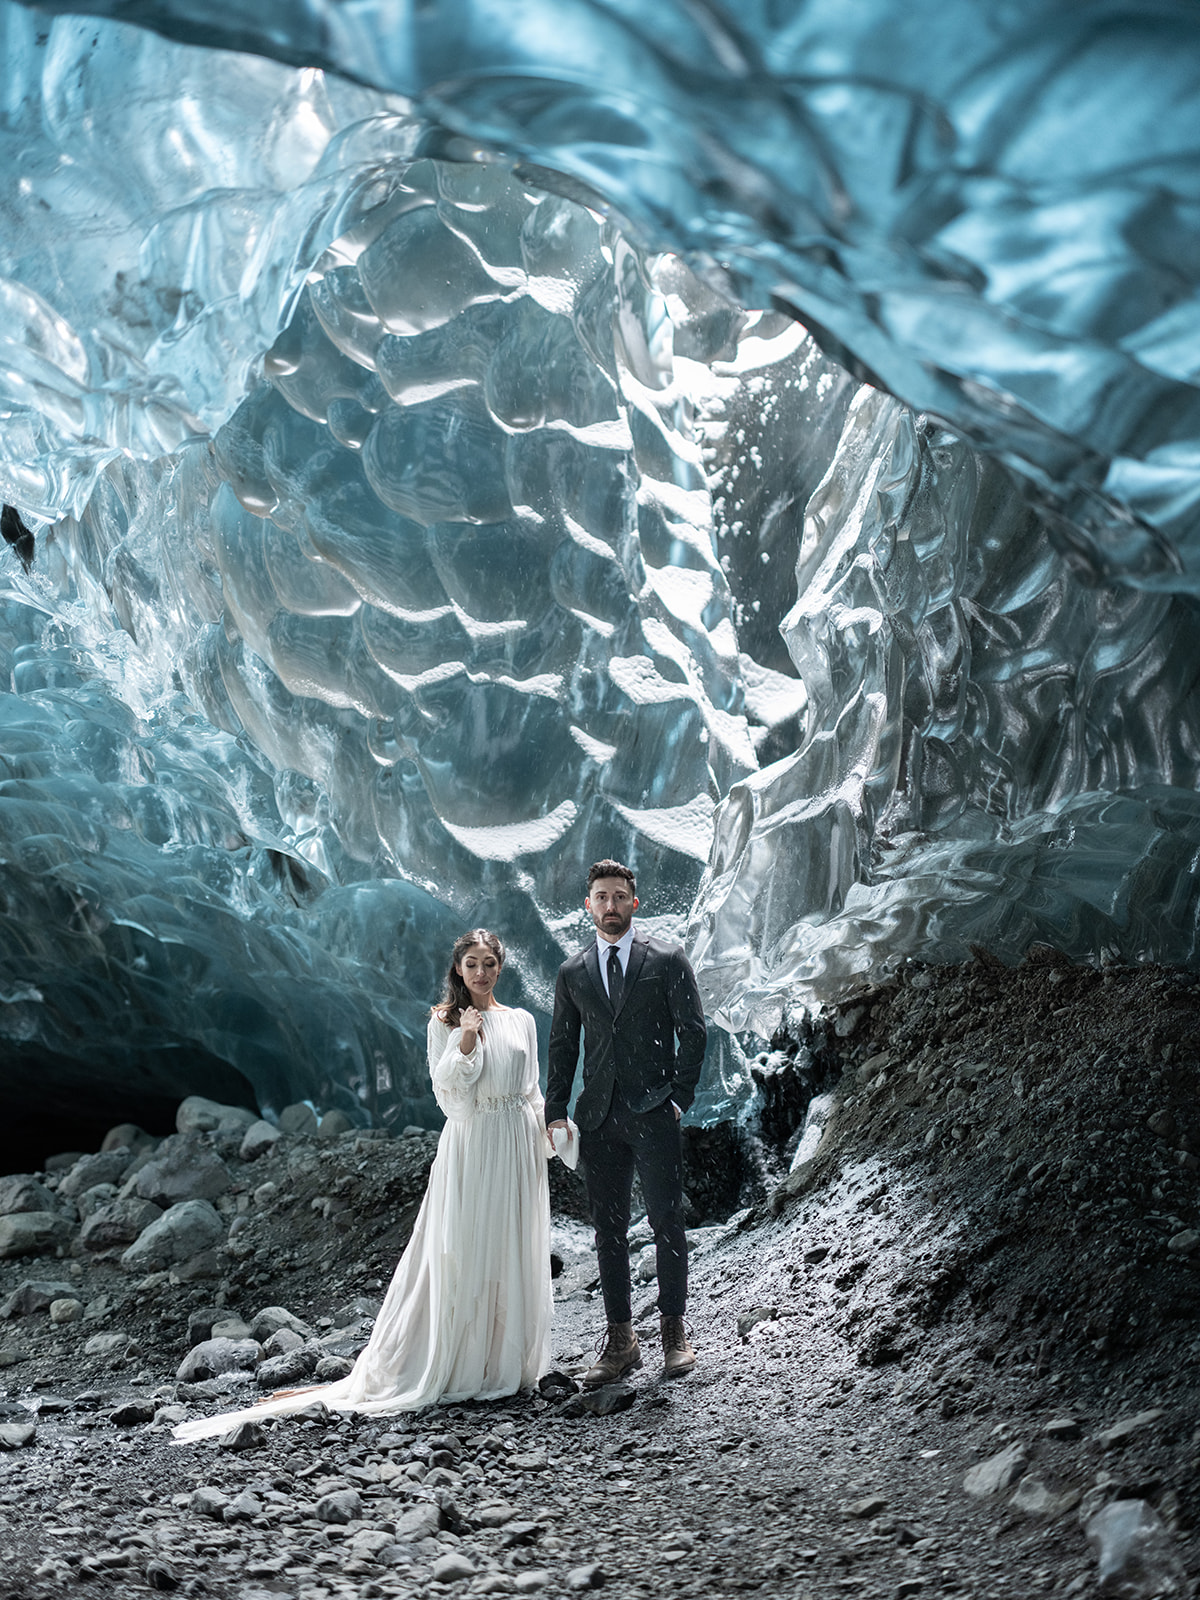 Bride and groom exploring and Ice Cave during their Iceland Elopement.